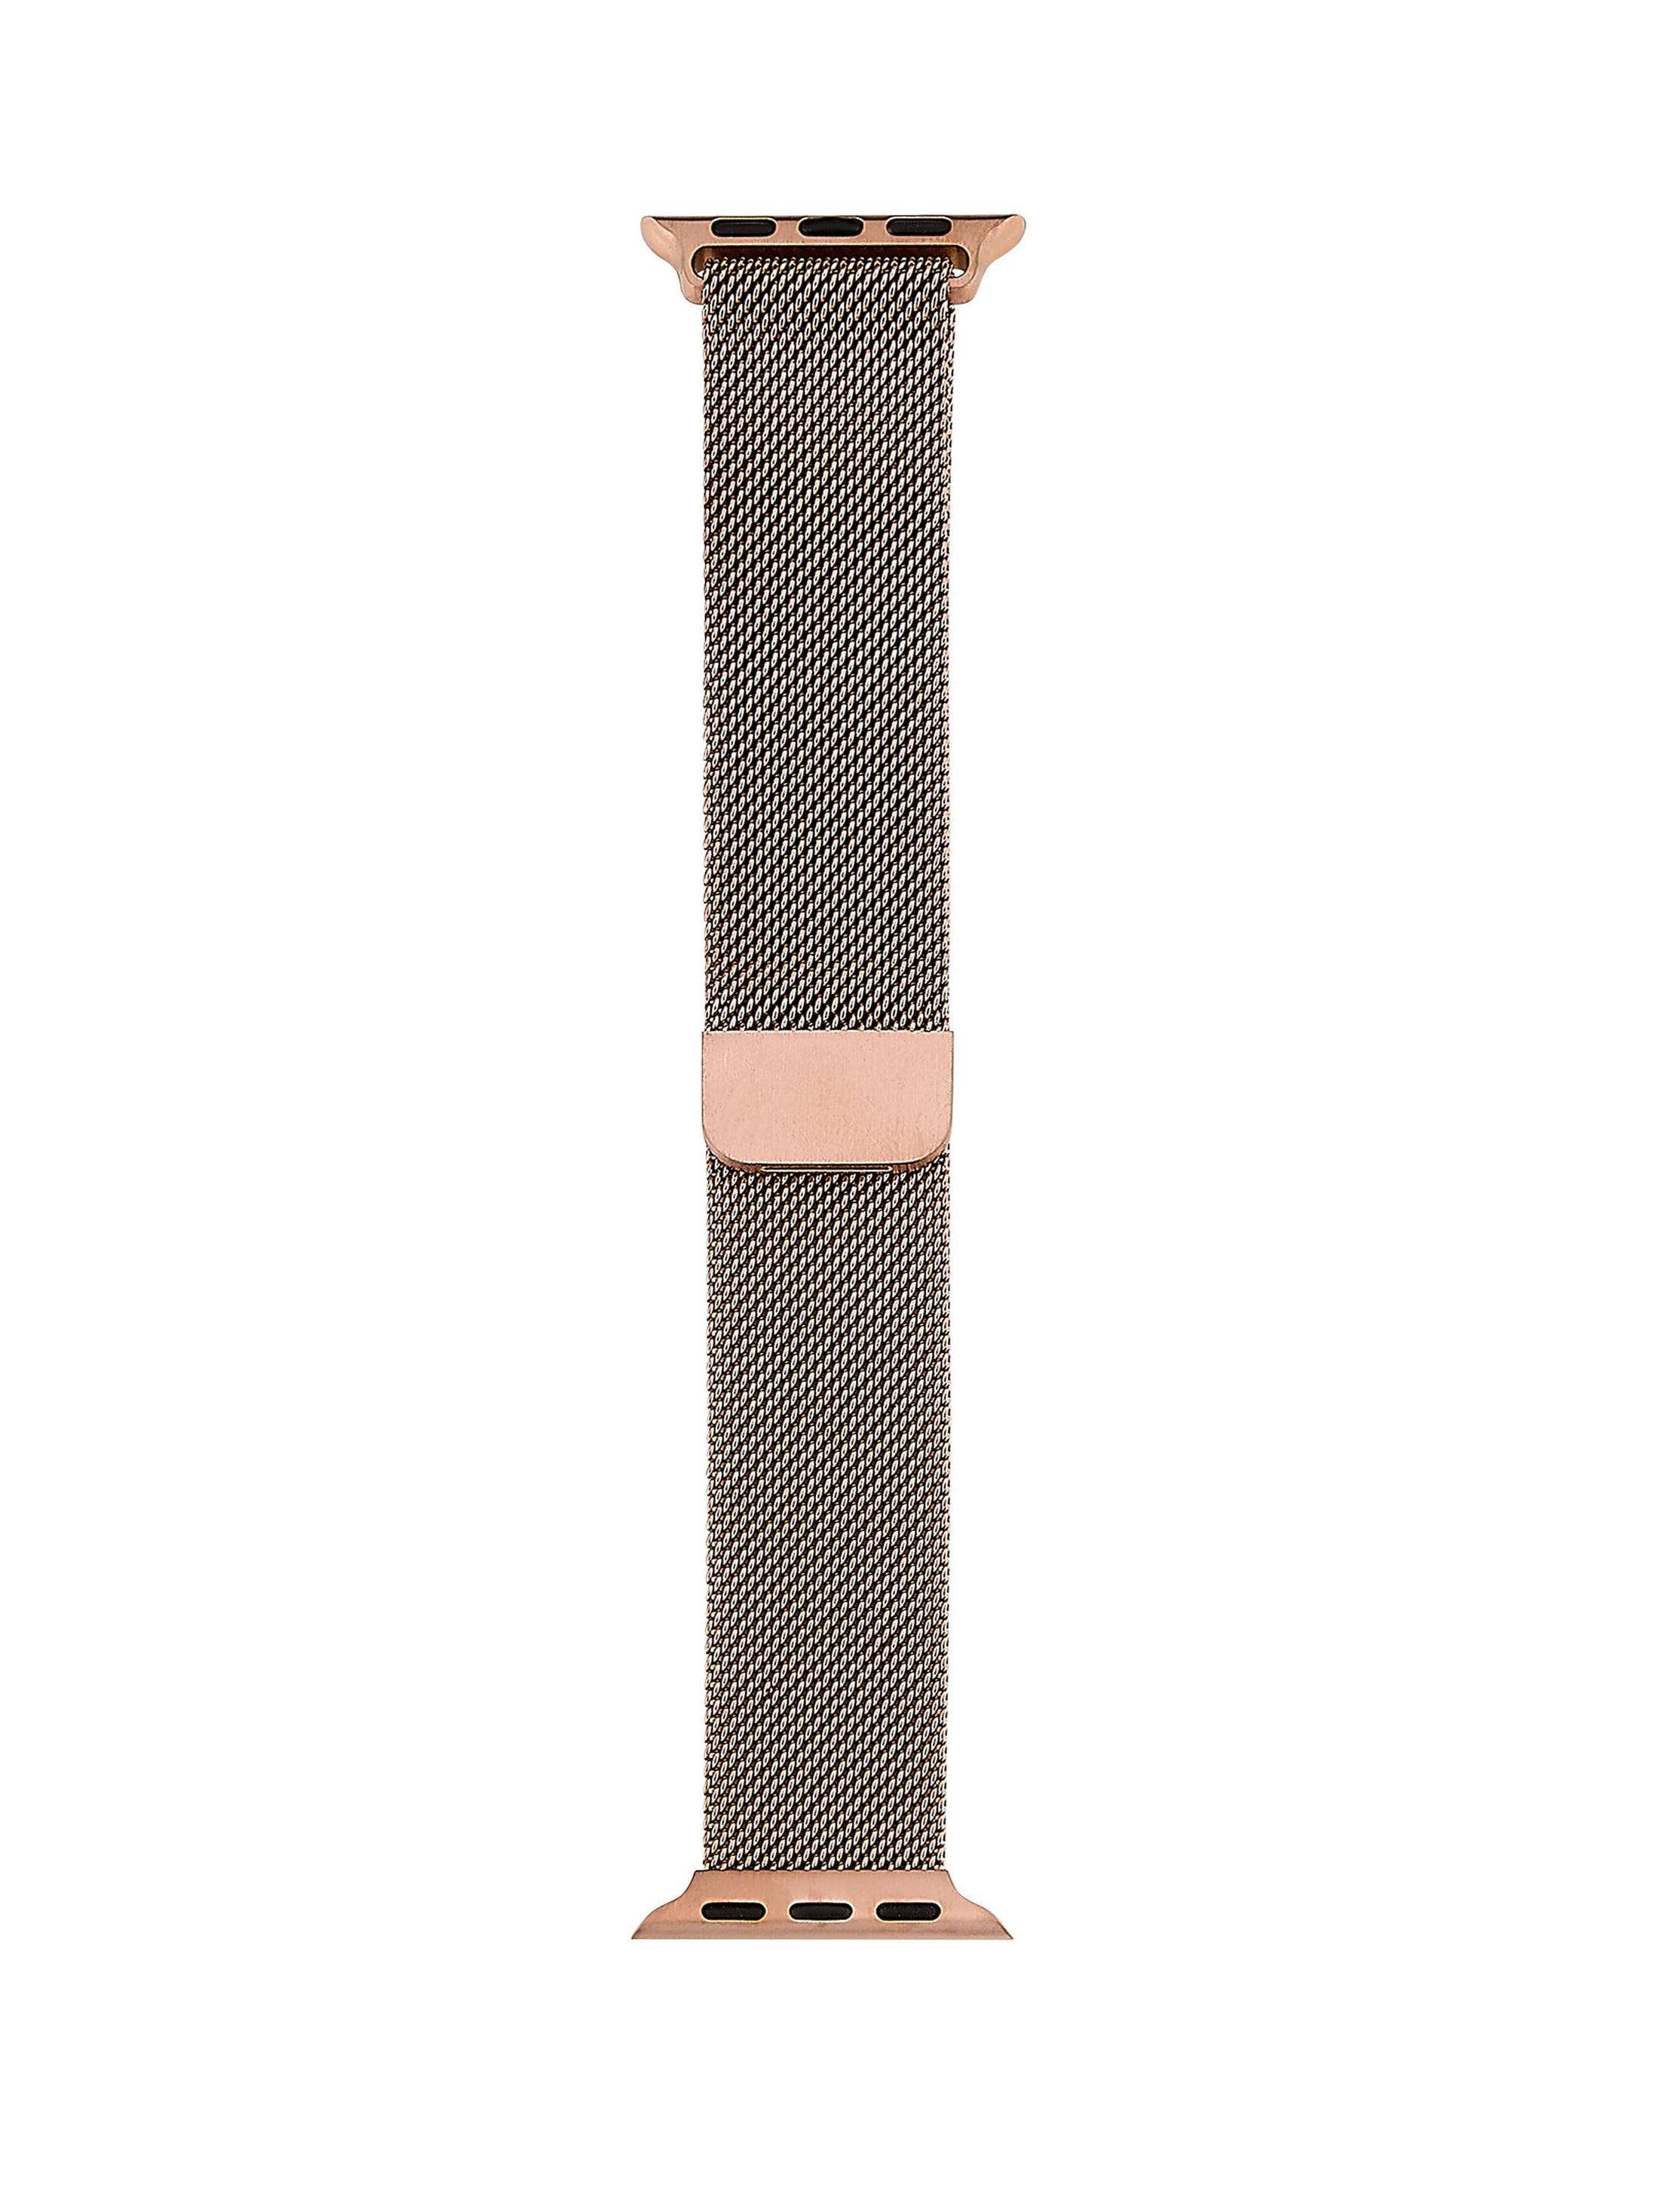 Rae Dunn Apple Watch Straps Set of 3 Fits 38mm 40mm Mesh, Silicone, Link in Rose Gold - Rae Dunn Wear